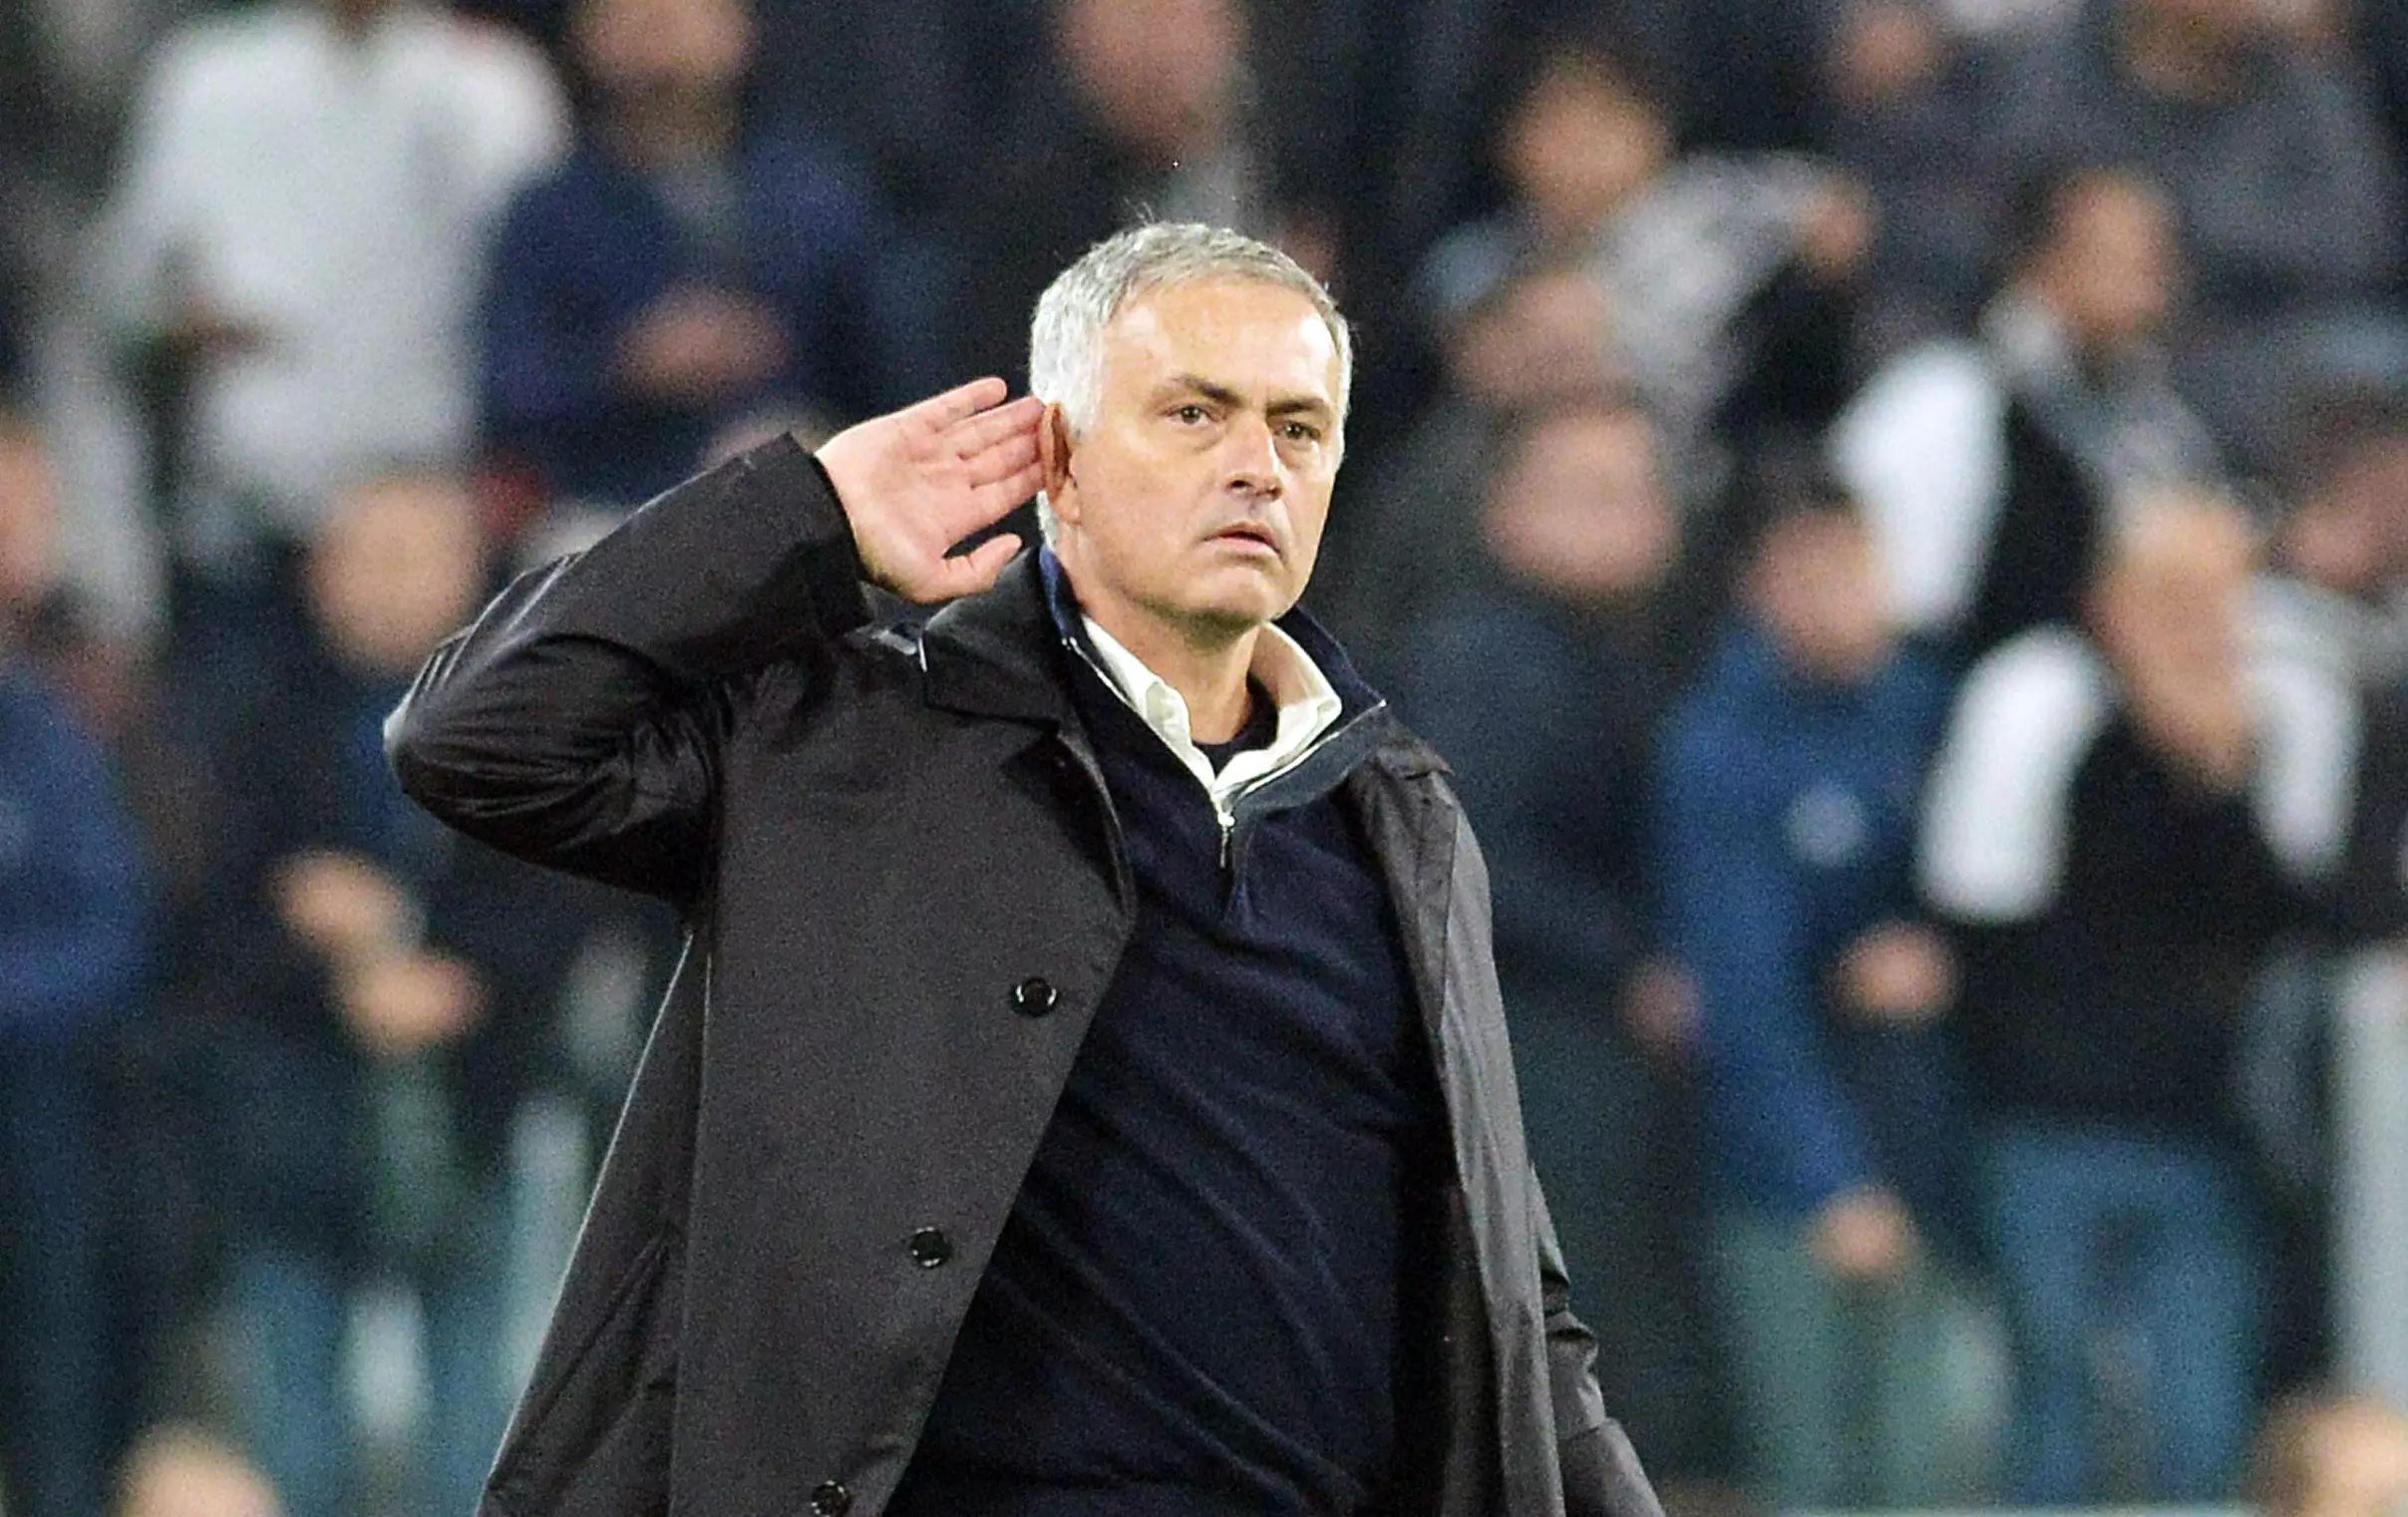 Mourinho cupping his ear on Wednesday night (